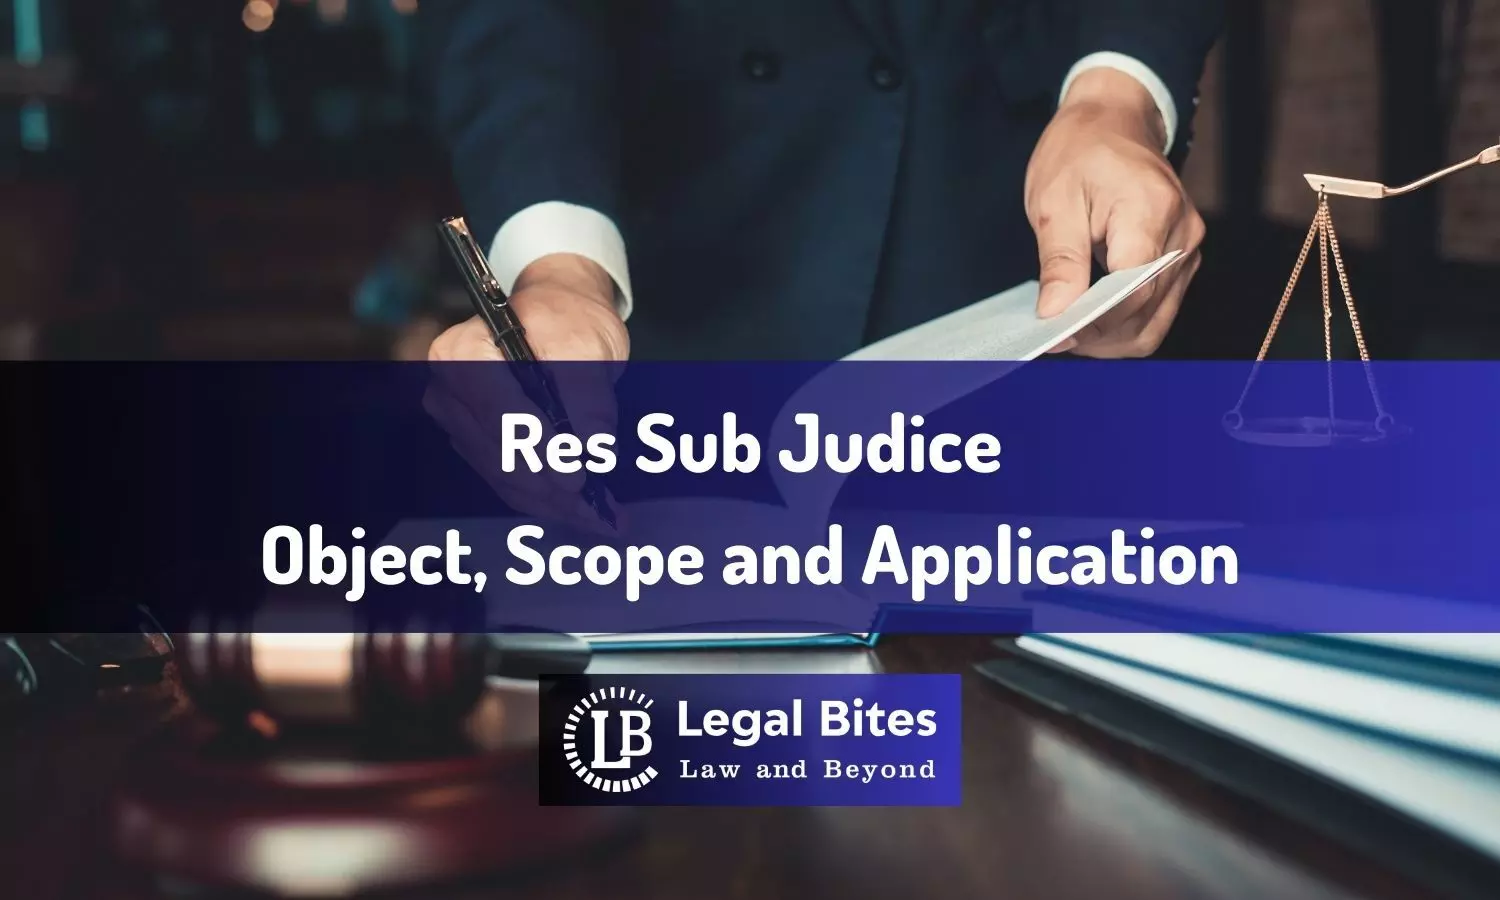 Res Sub Judice: Object, Scope and Application